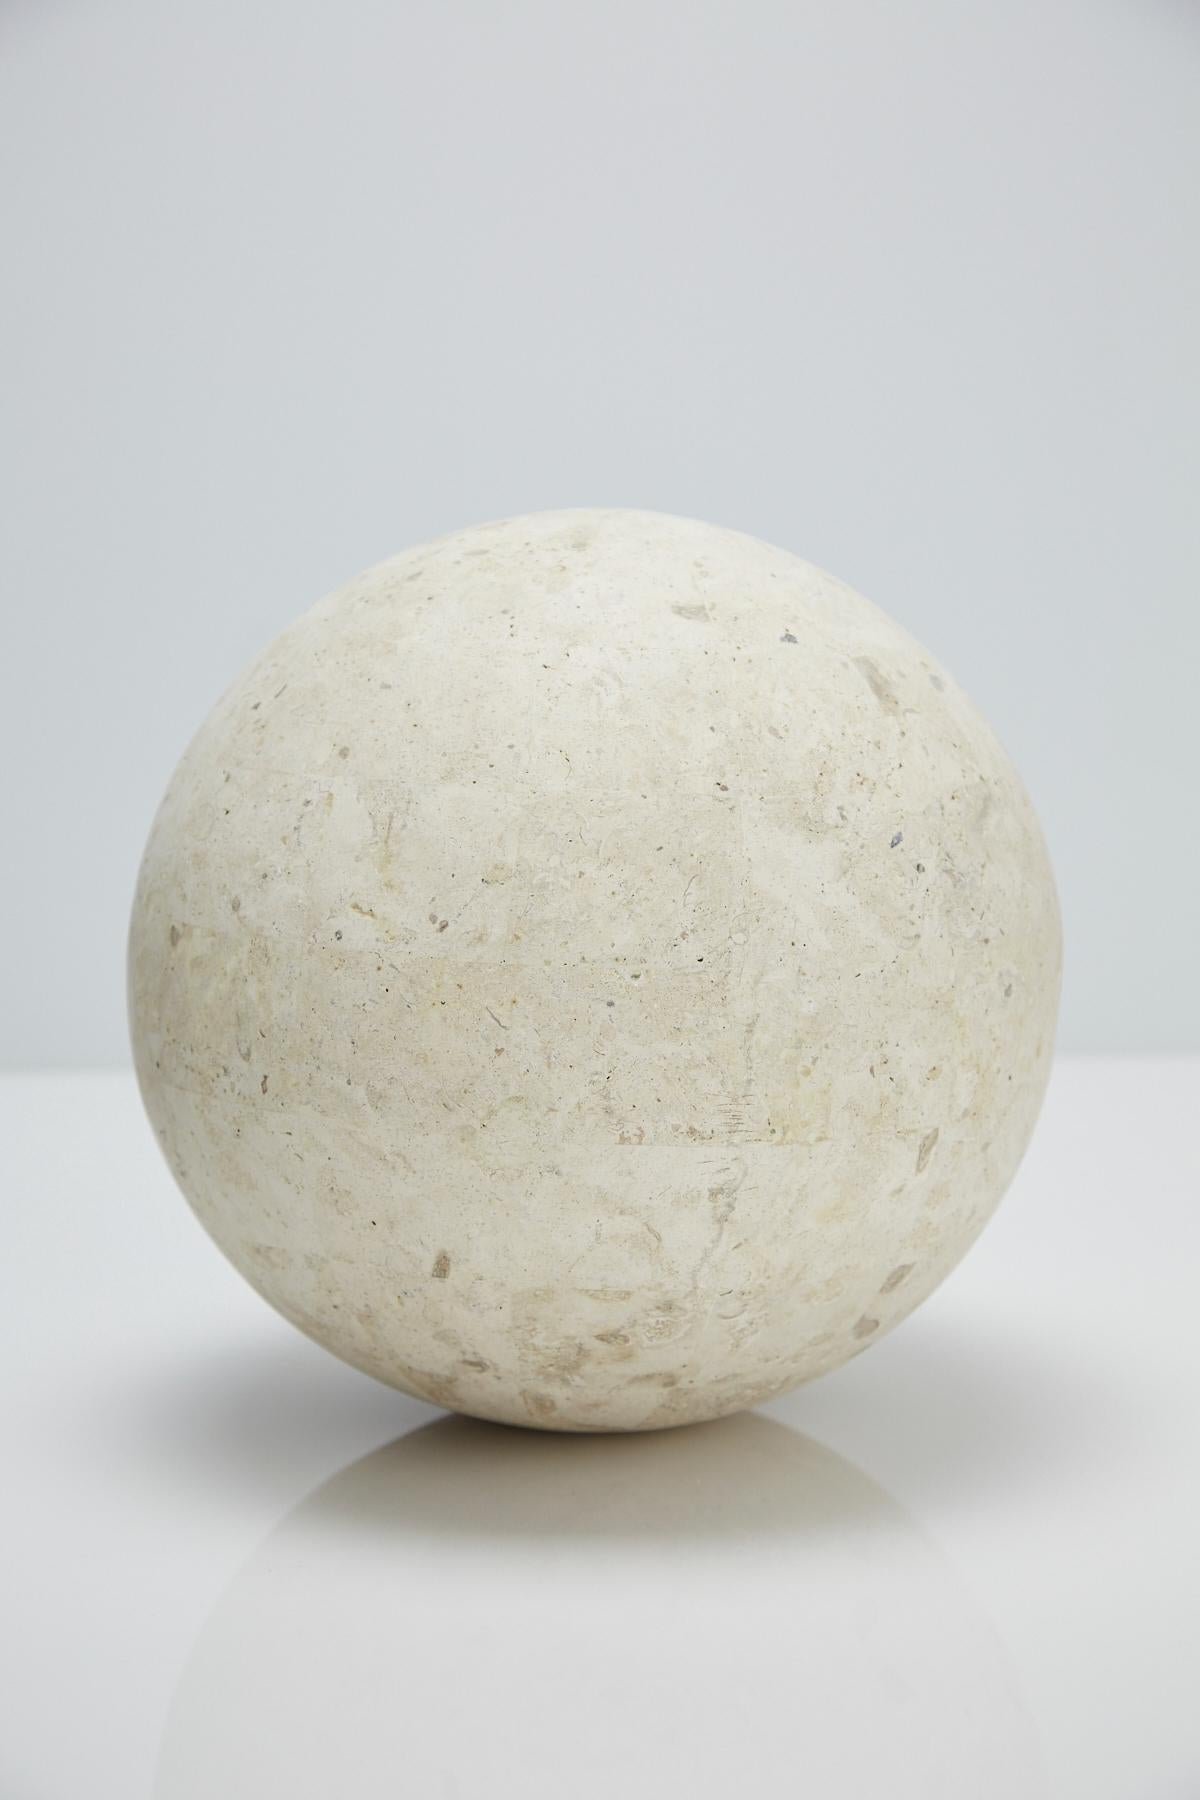 Large 10.5 in diameter Postmodern tessellated stone sphere executed in matte Mactan stone over a fiberglass body.

Pair available.

All furnishings are made from 100% natural Fossil Stone or Seashell inlay, carefully hand cut and crafted